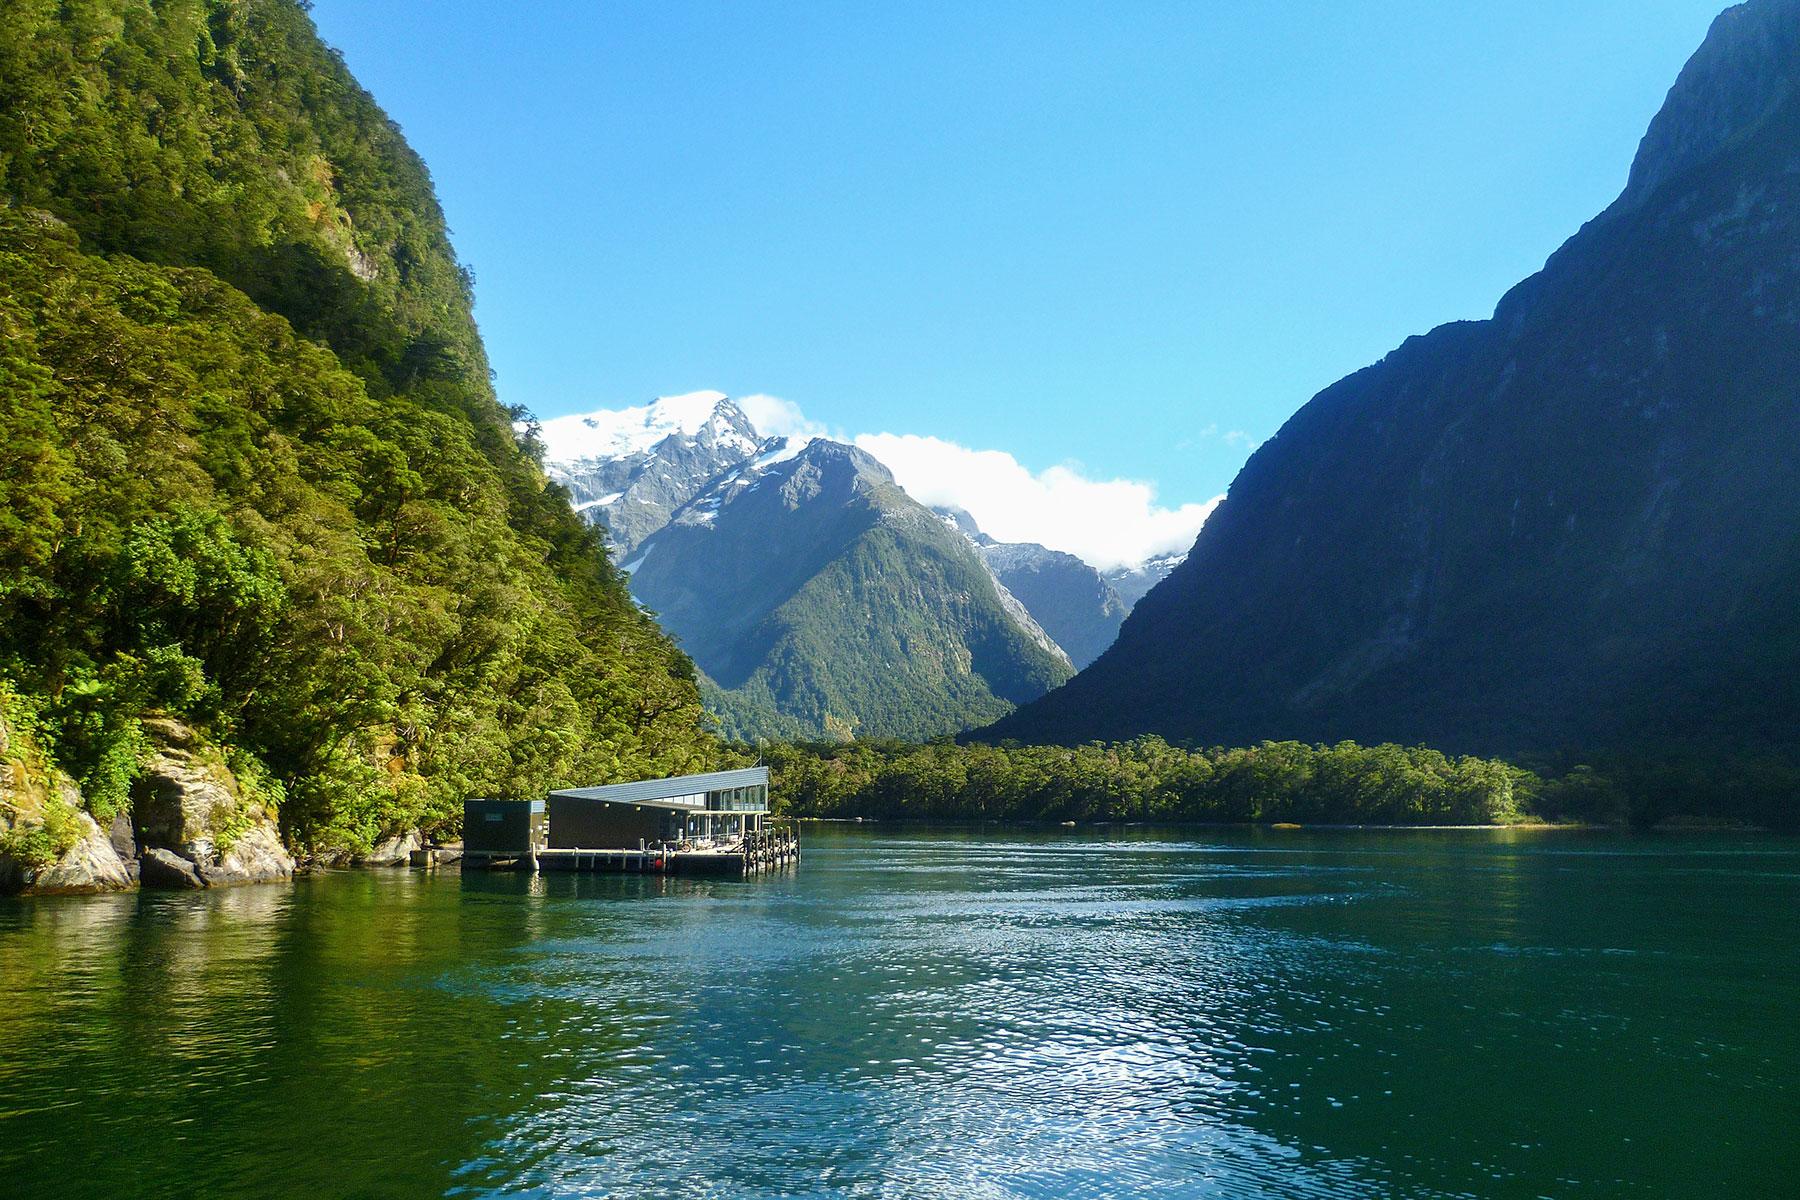 What To See And Do In The Fiords Of New Zealand